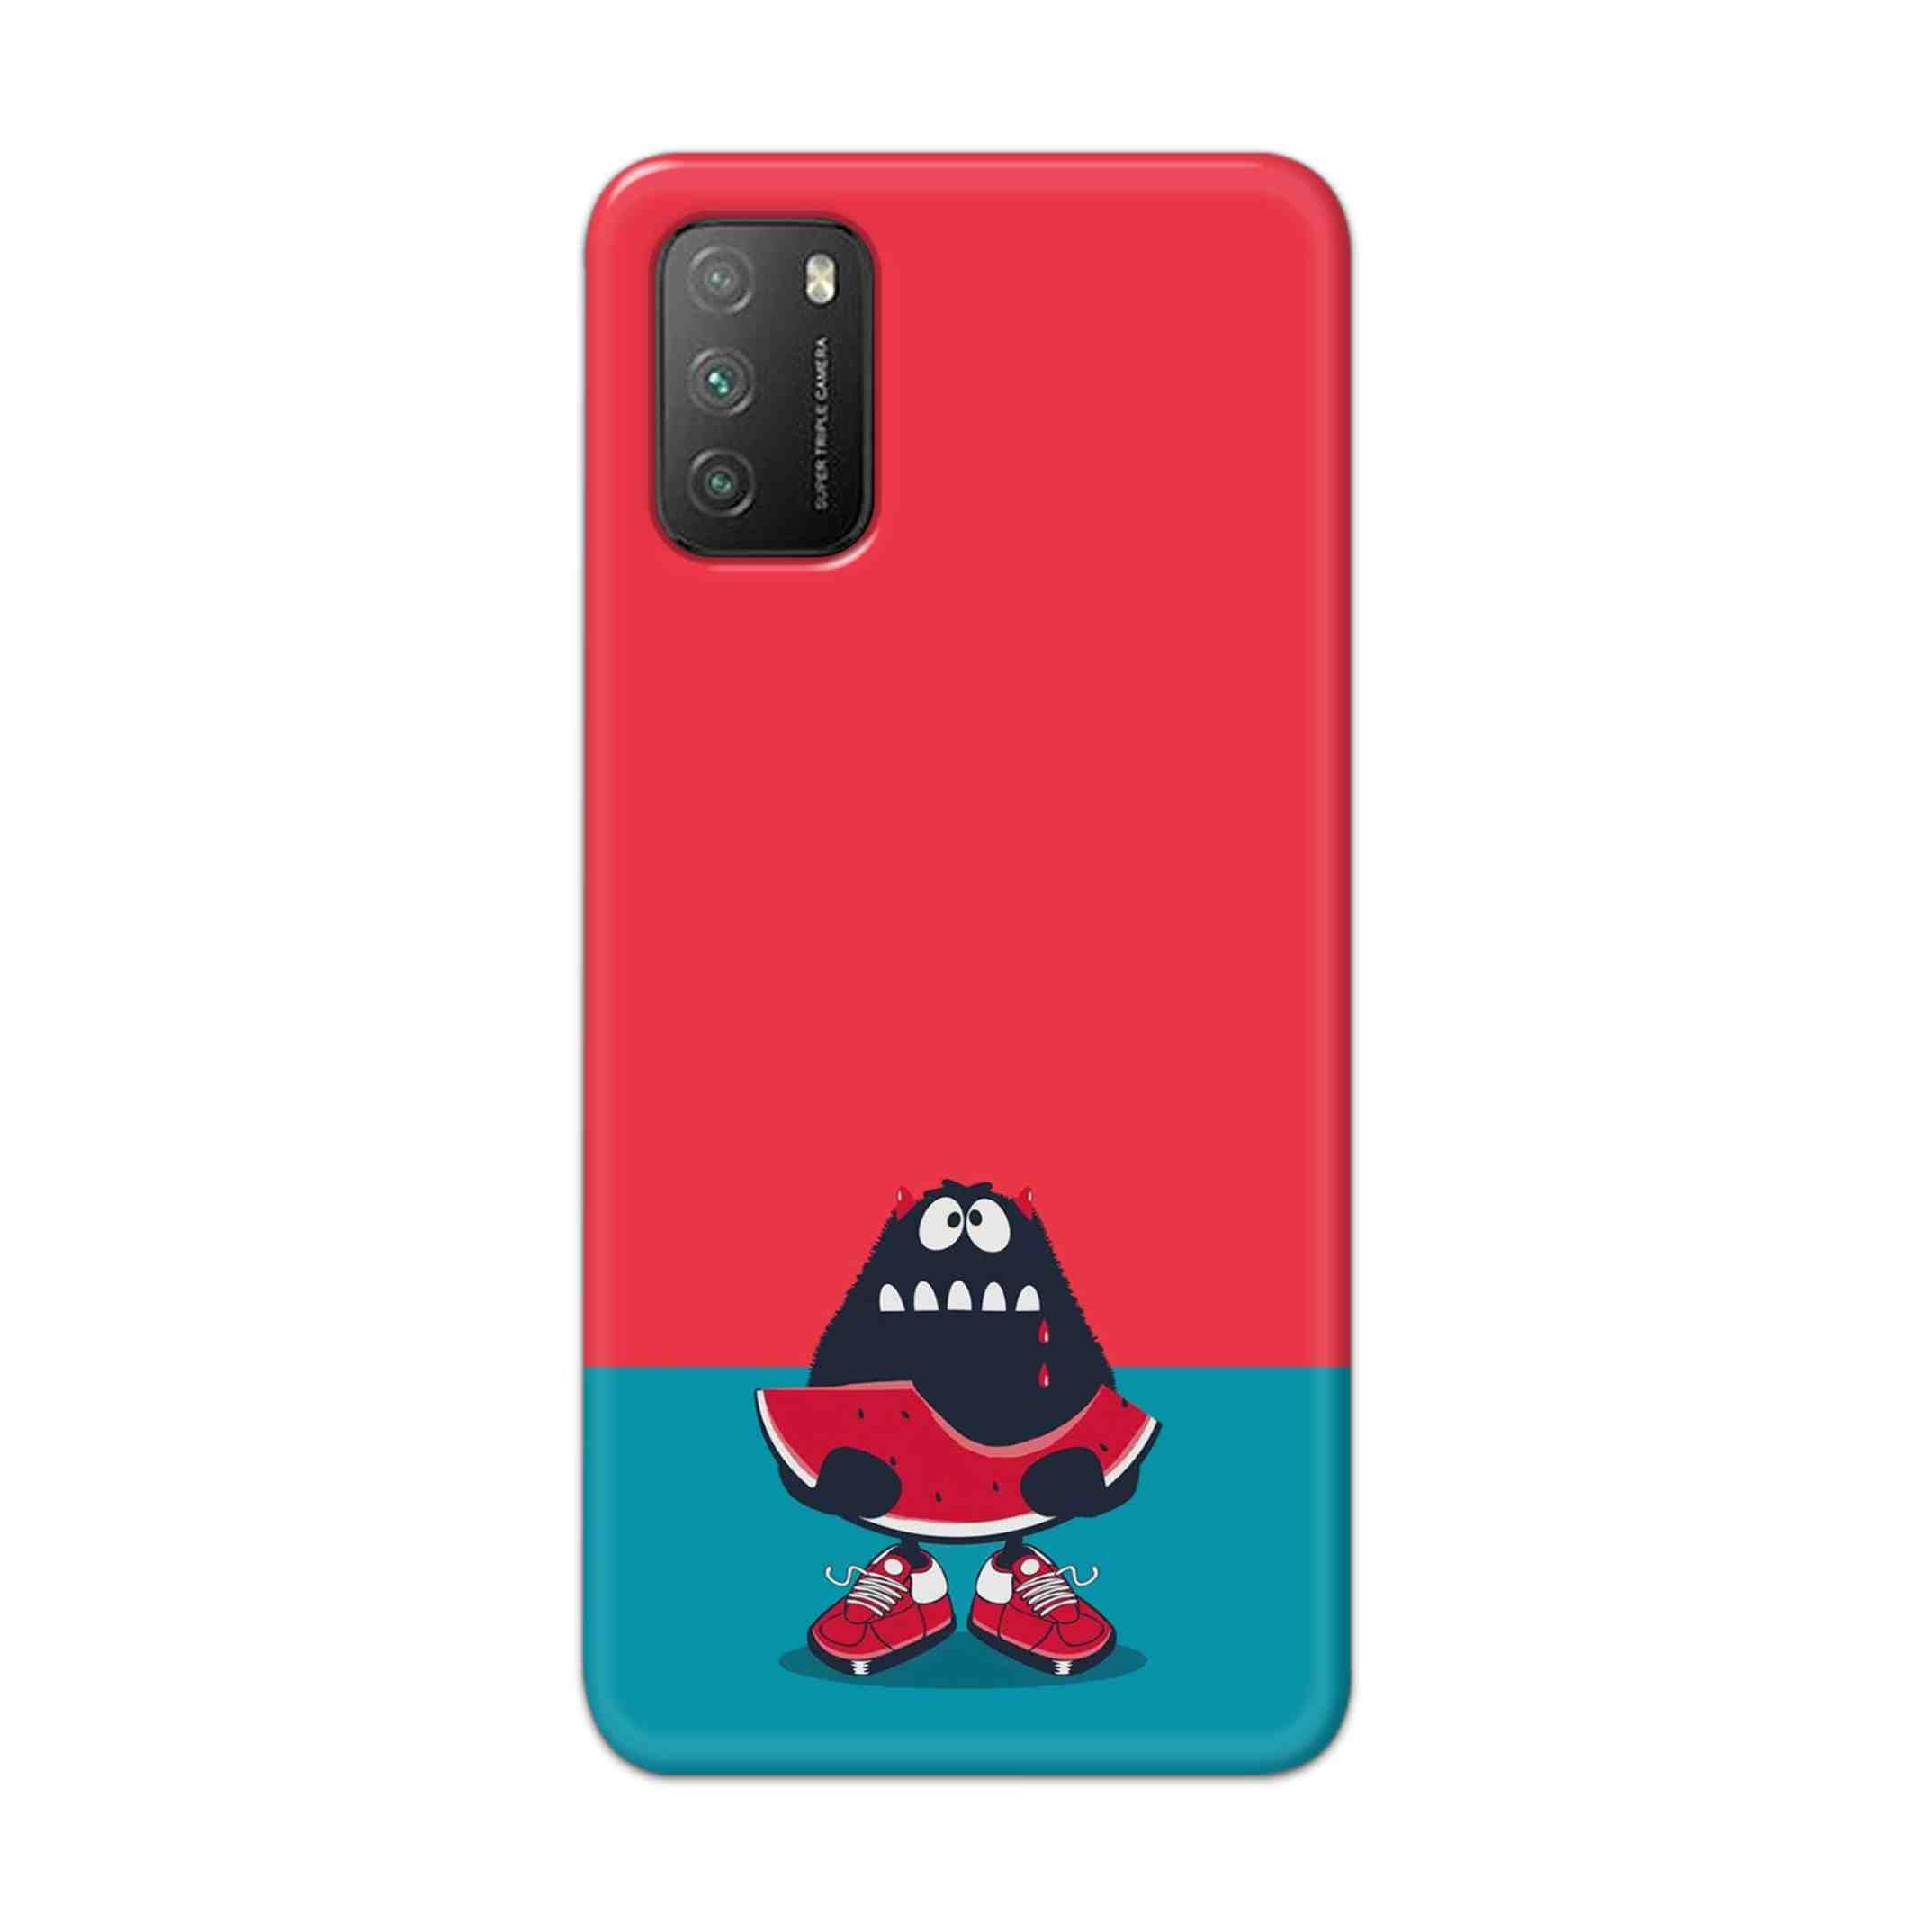 Buy Watermelon Hard Back Mobile Phone Case Cover For Poco M3 Online